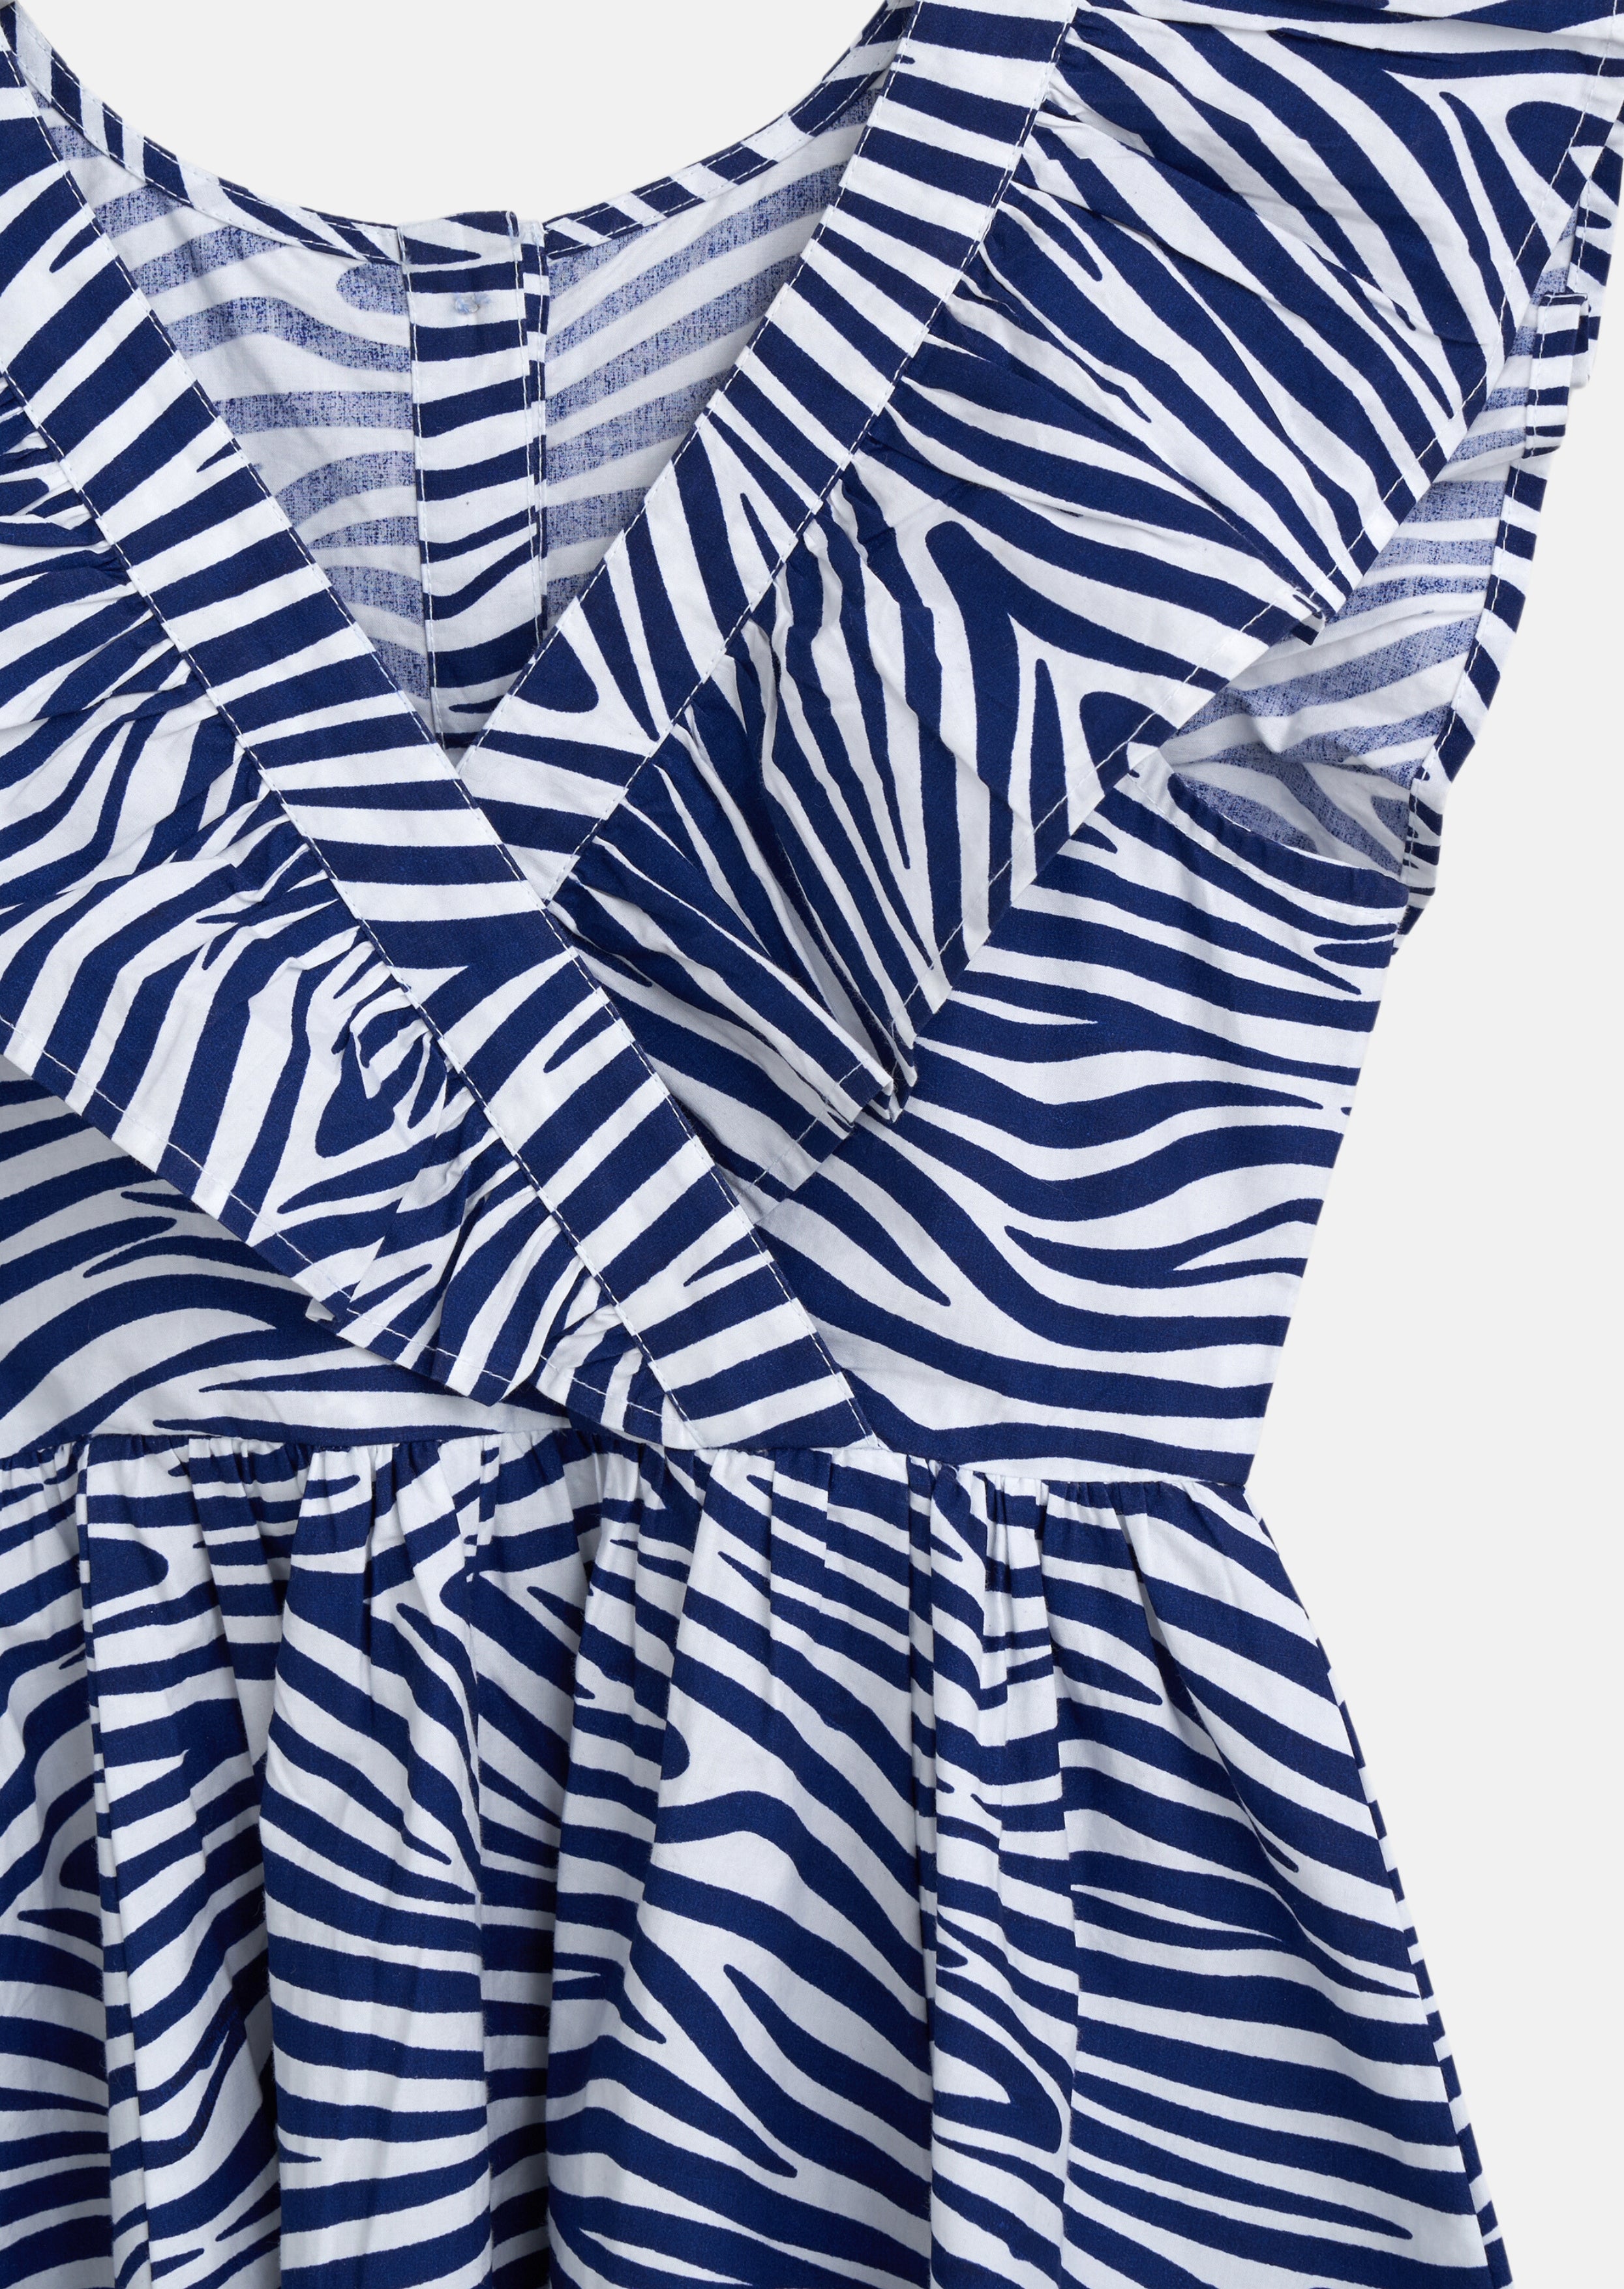 Girls Zebra Printed Blue Dress with Butterfly Sleeves